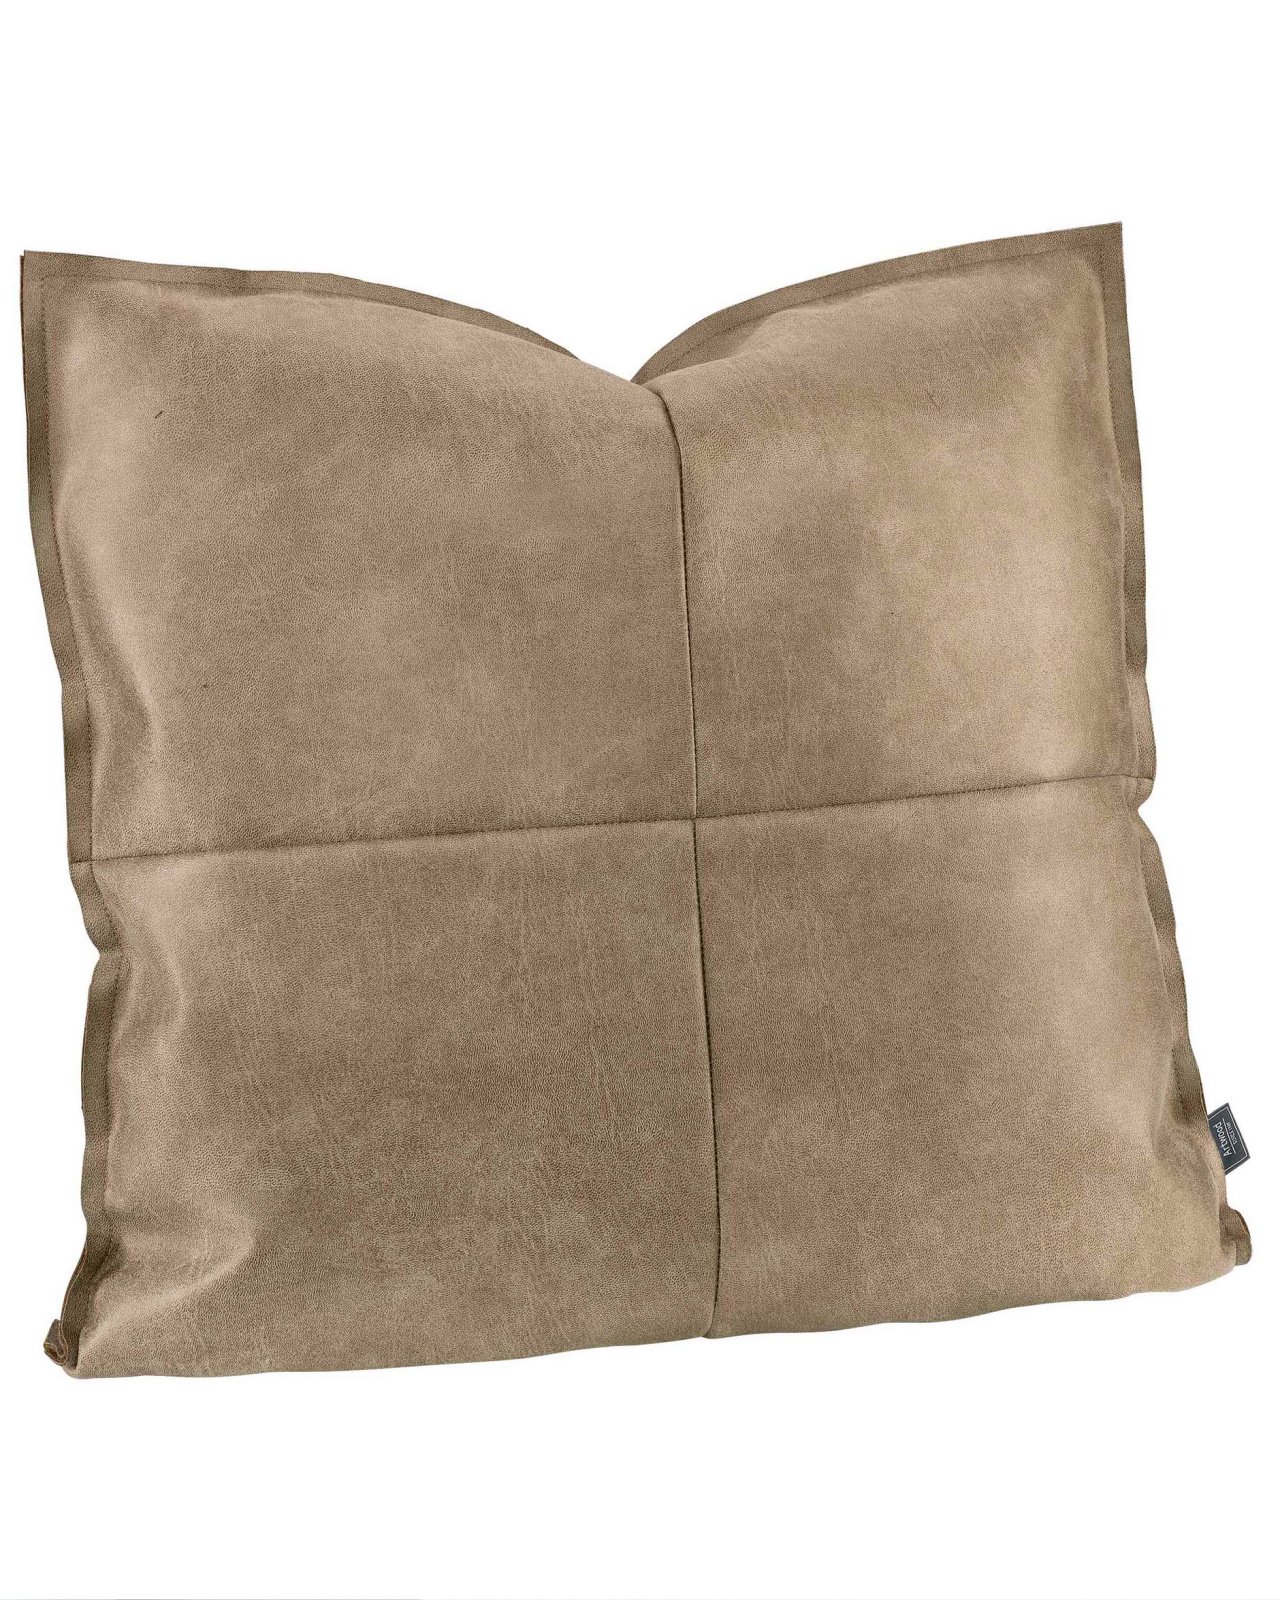 Buffalo cushion cover liver OUTLET